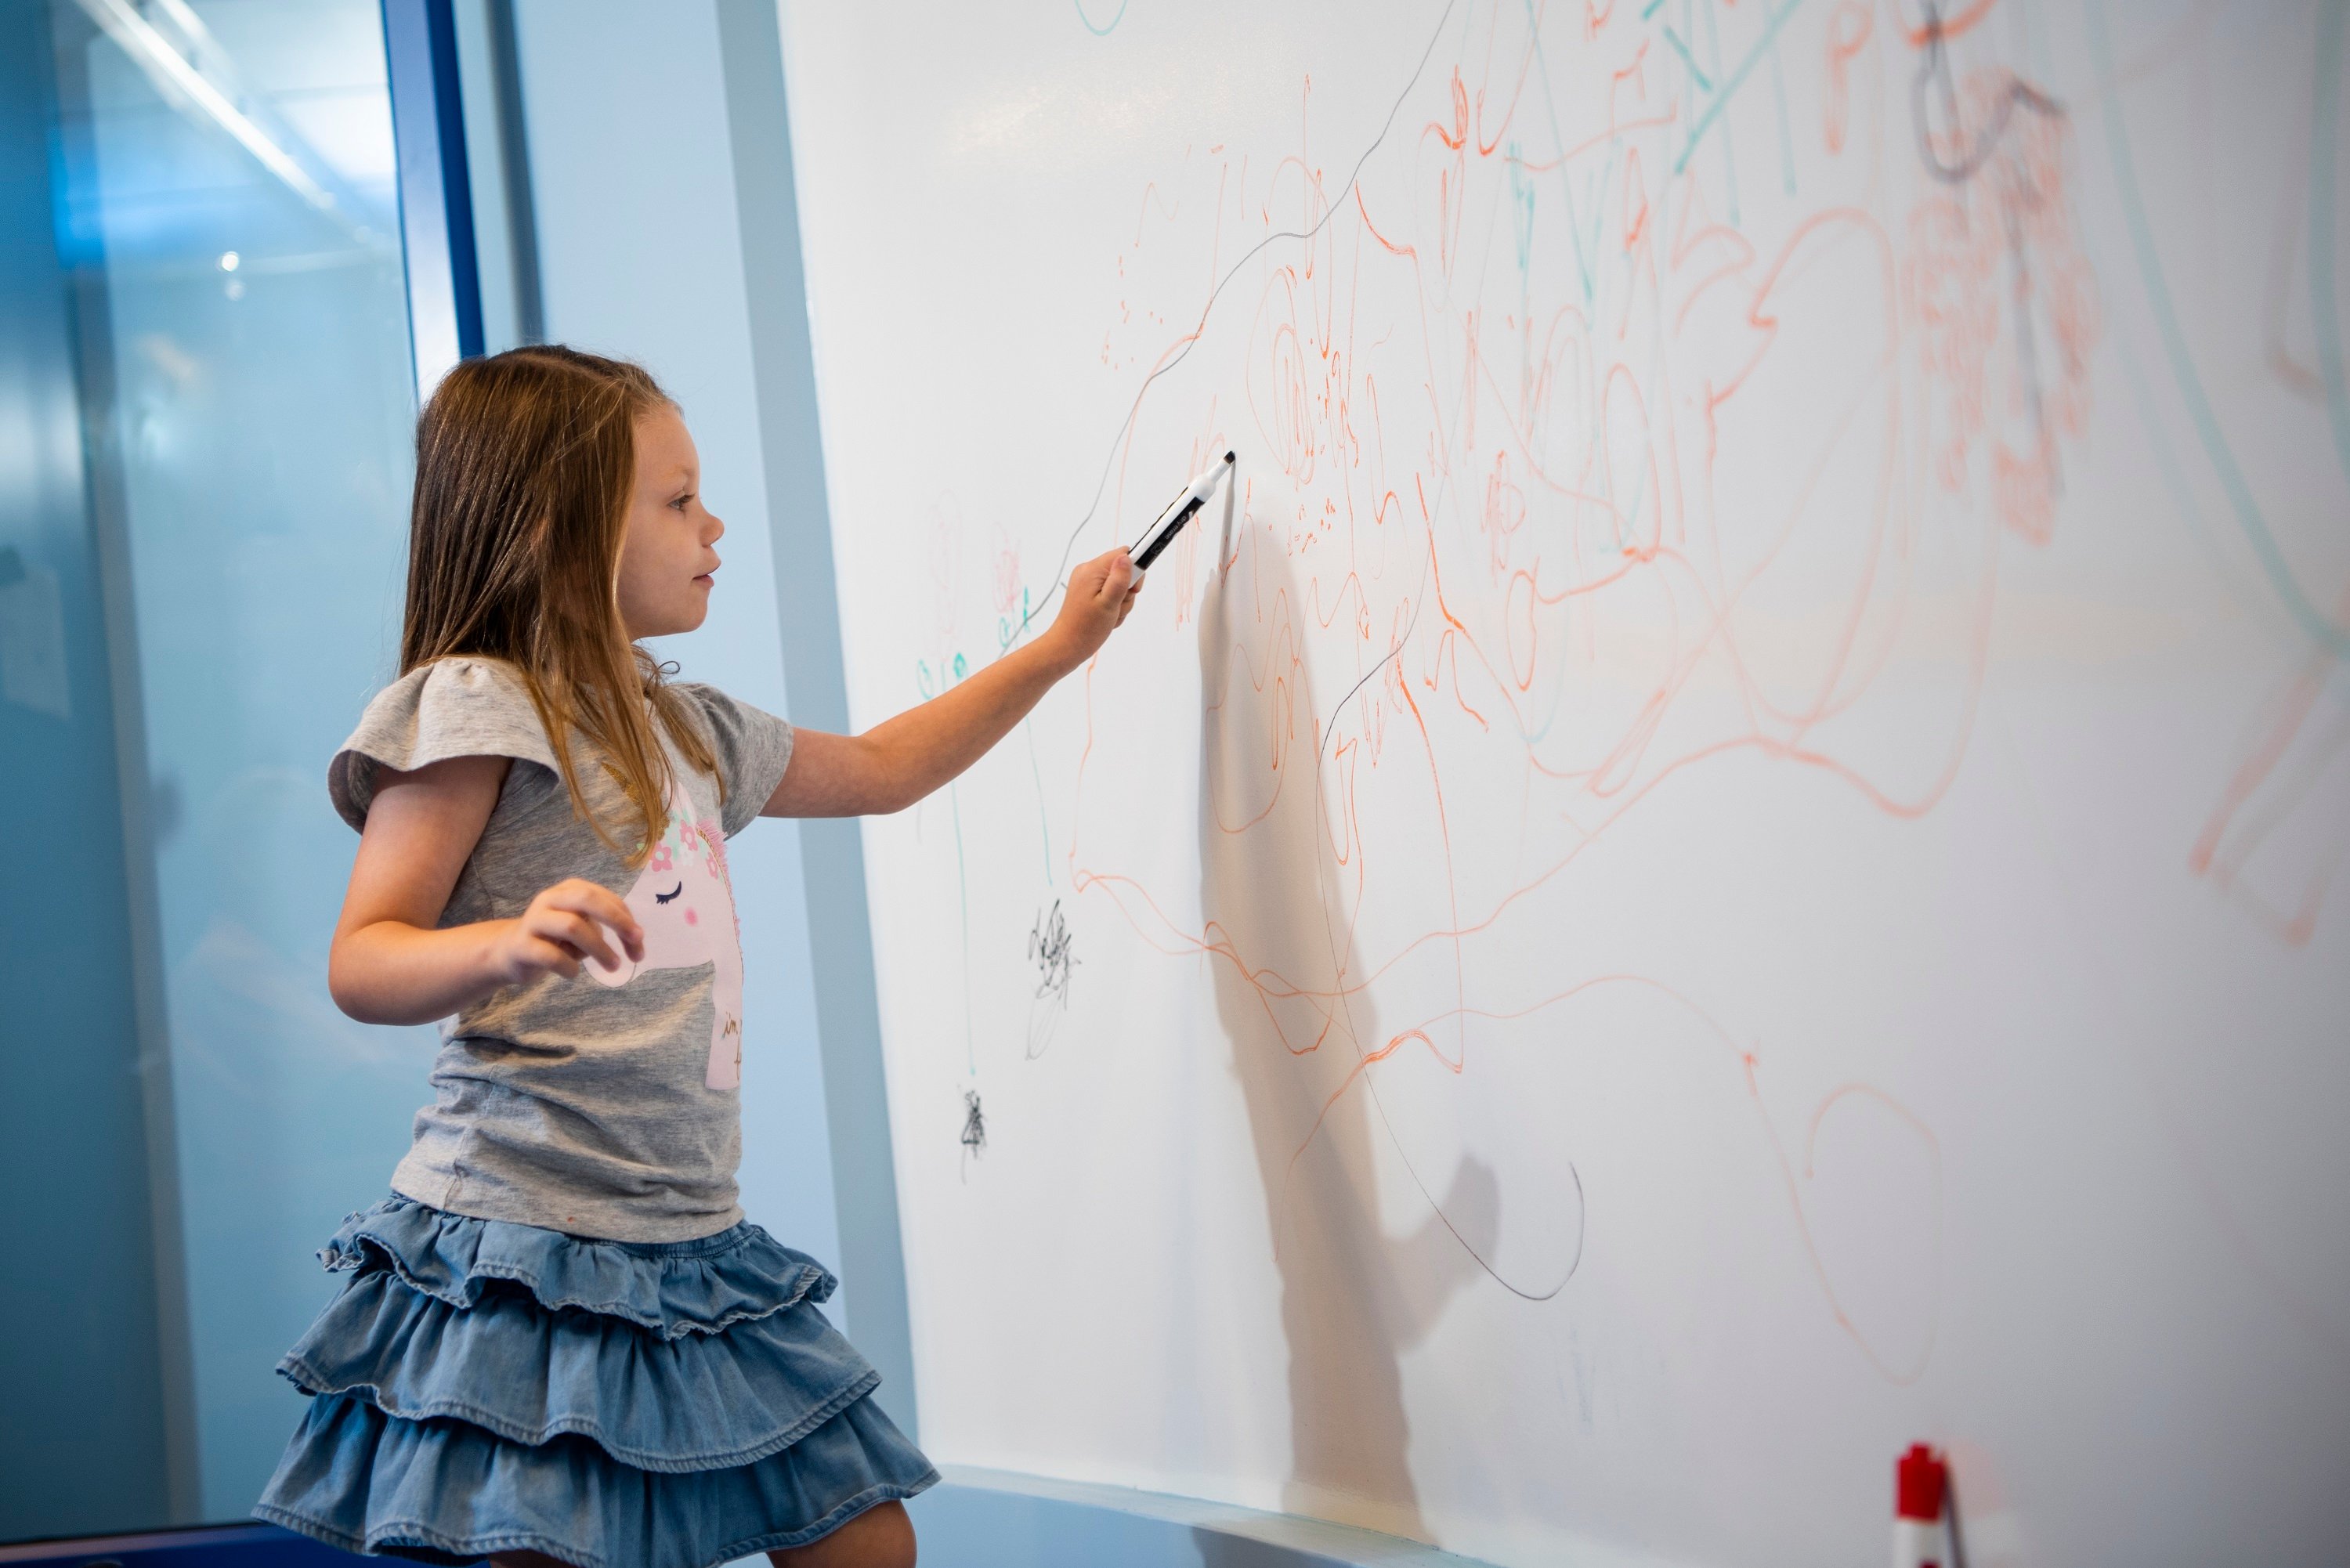 Girl drawing on a whiteboard